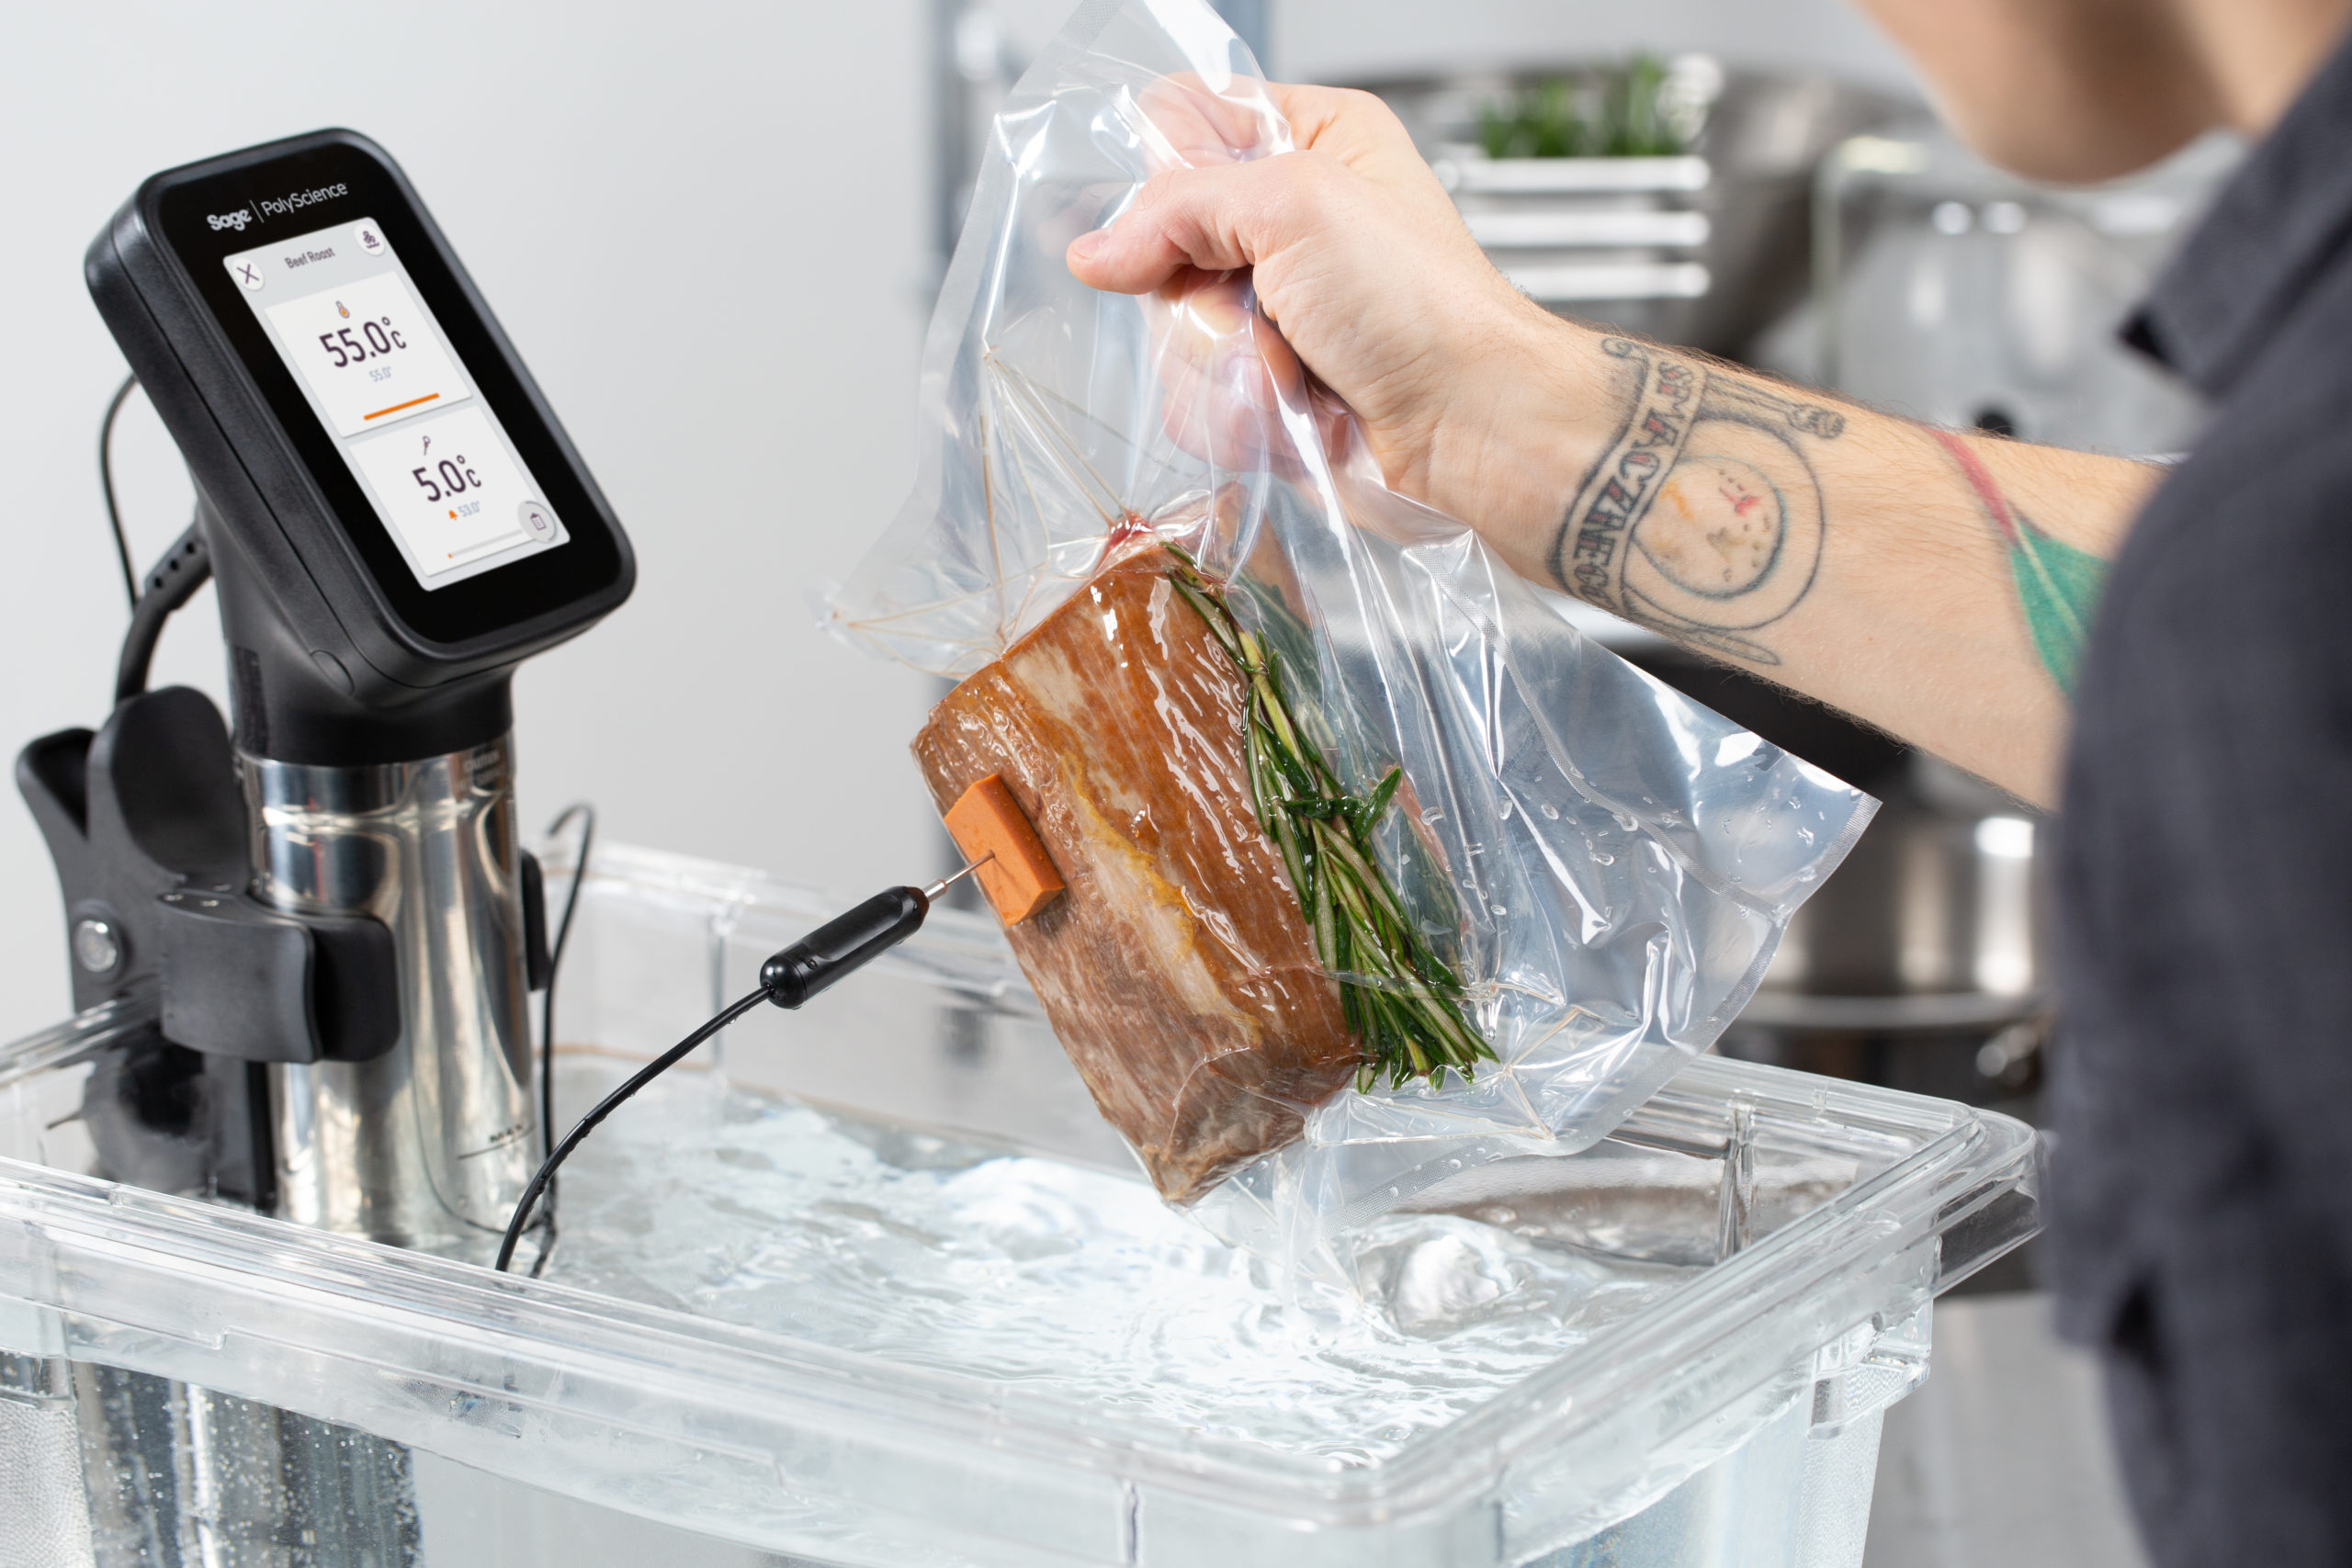 THE HYDROPRO™ PLUS IMMERSION CIRCULATOR Sous Vide* –